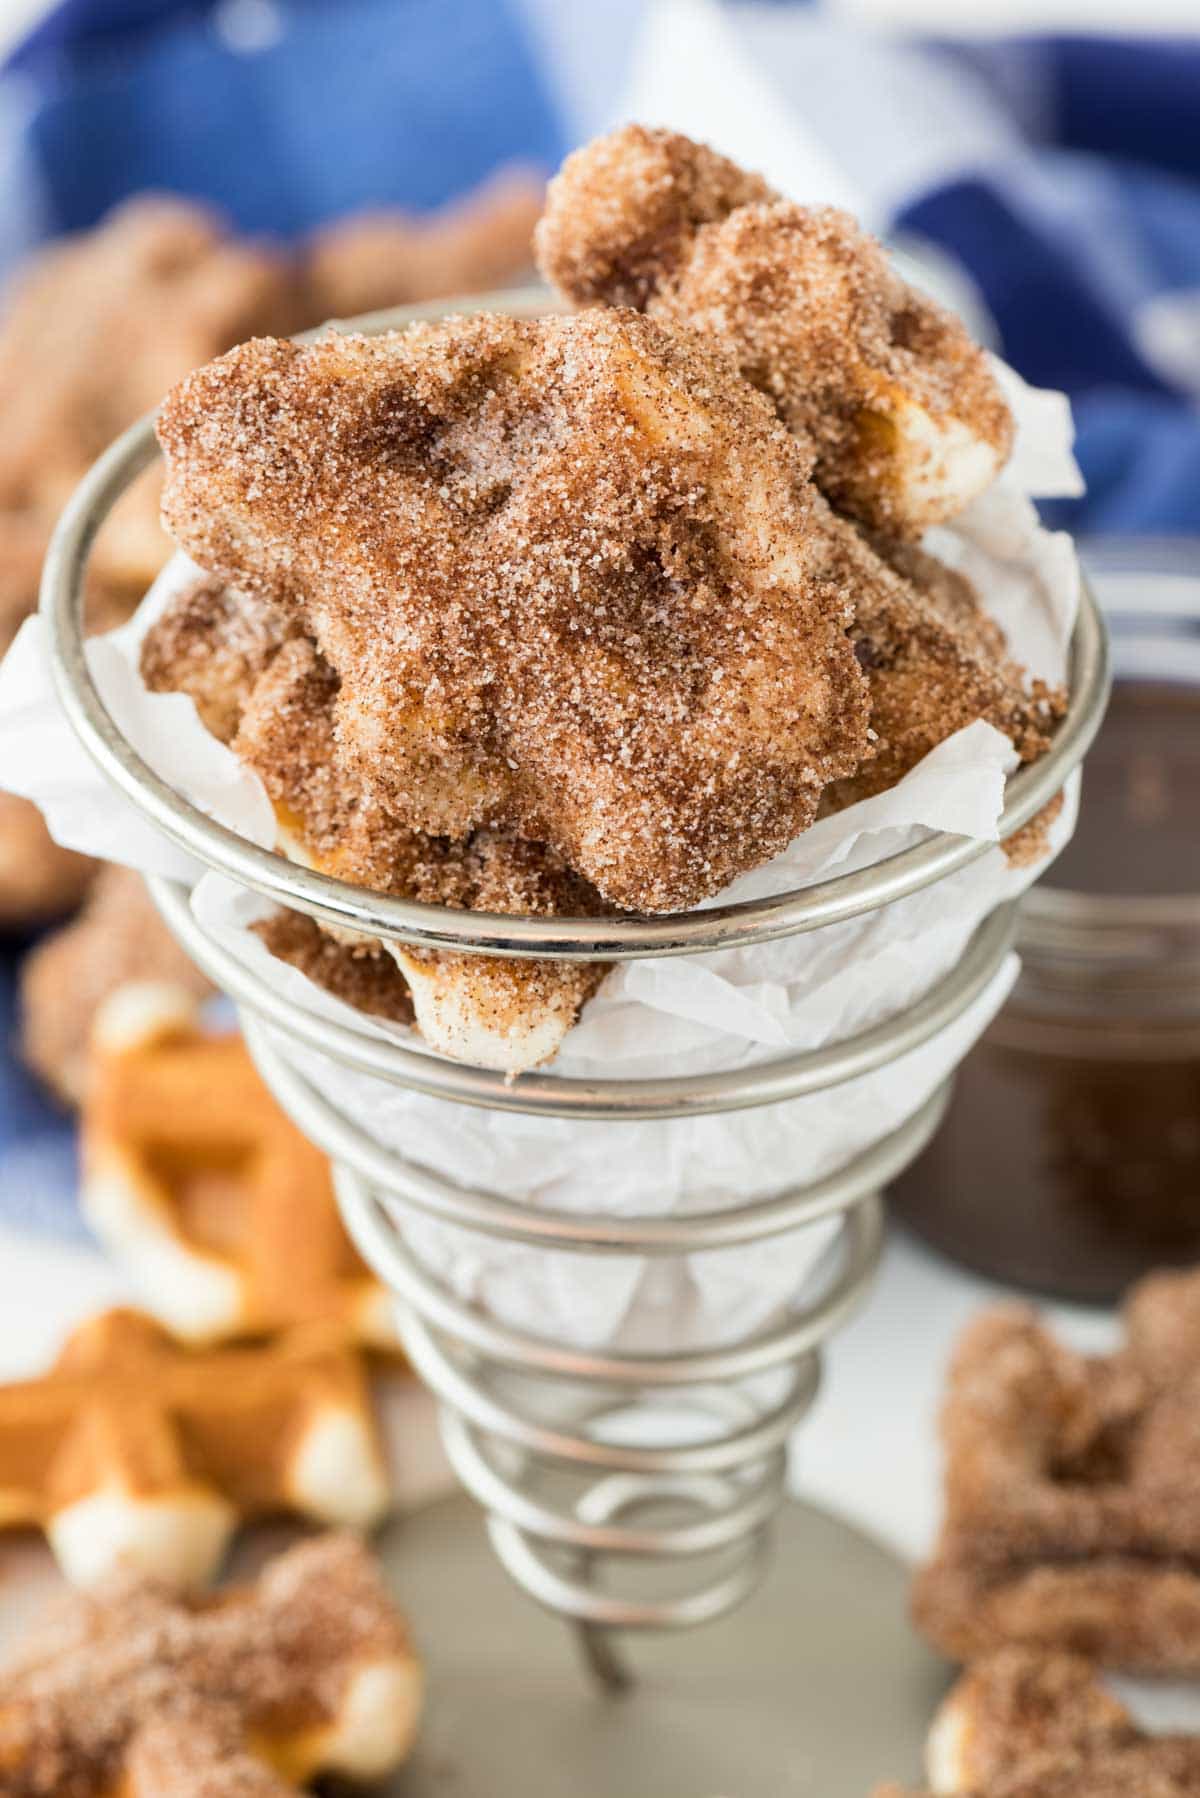 Easy Churro Bites - this churro recipe has only 4 ingredients and isn't fried. They're made in a waffle iron! Dip them in chocolate ganache for a sinful treat.